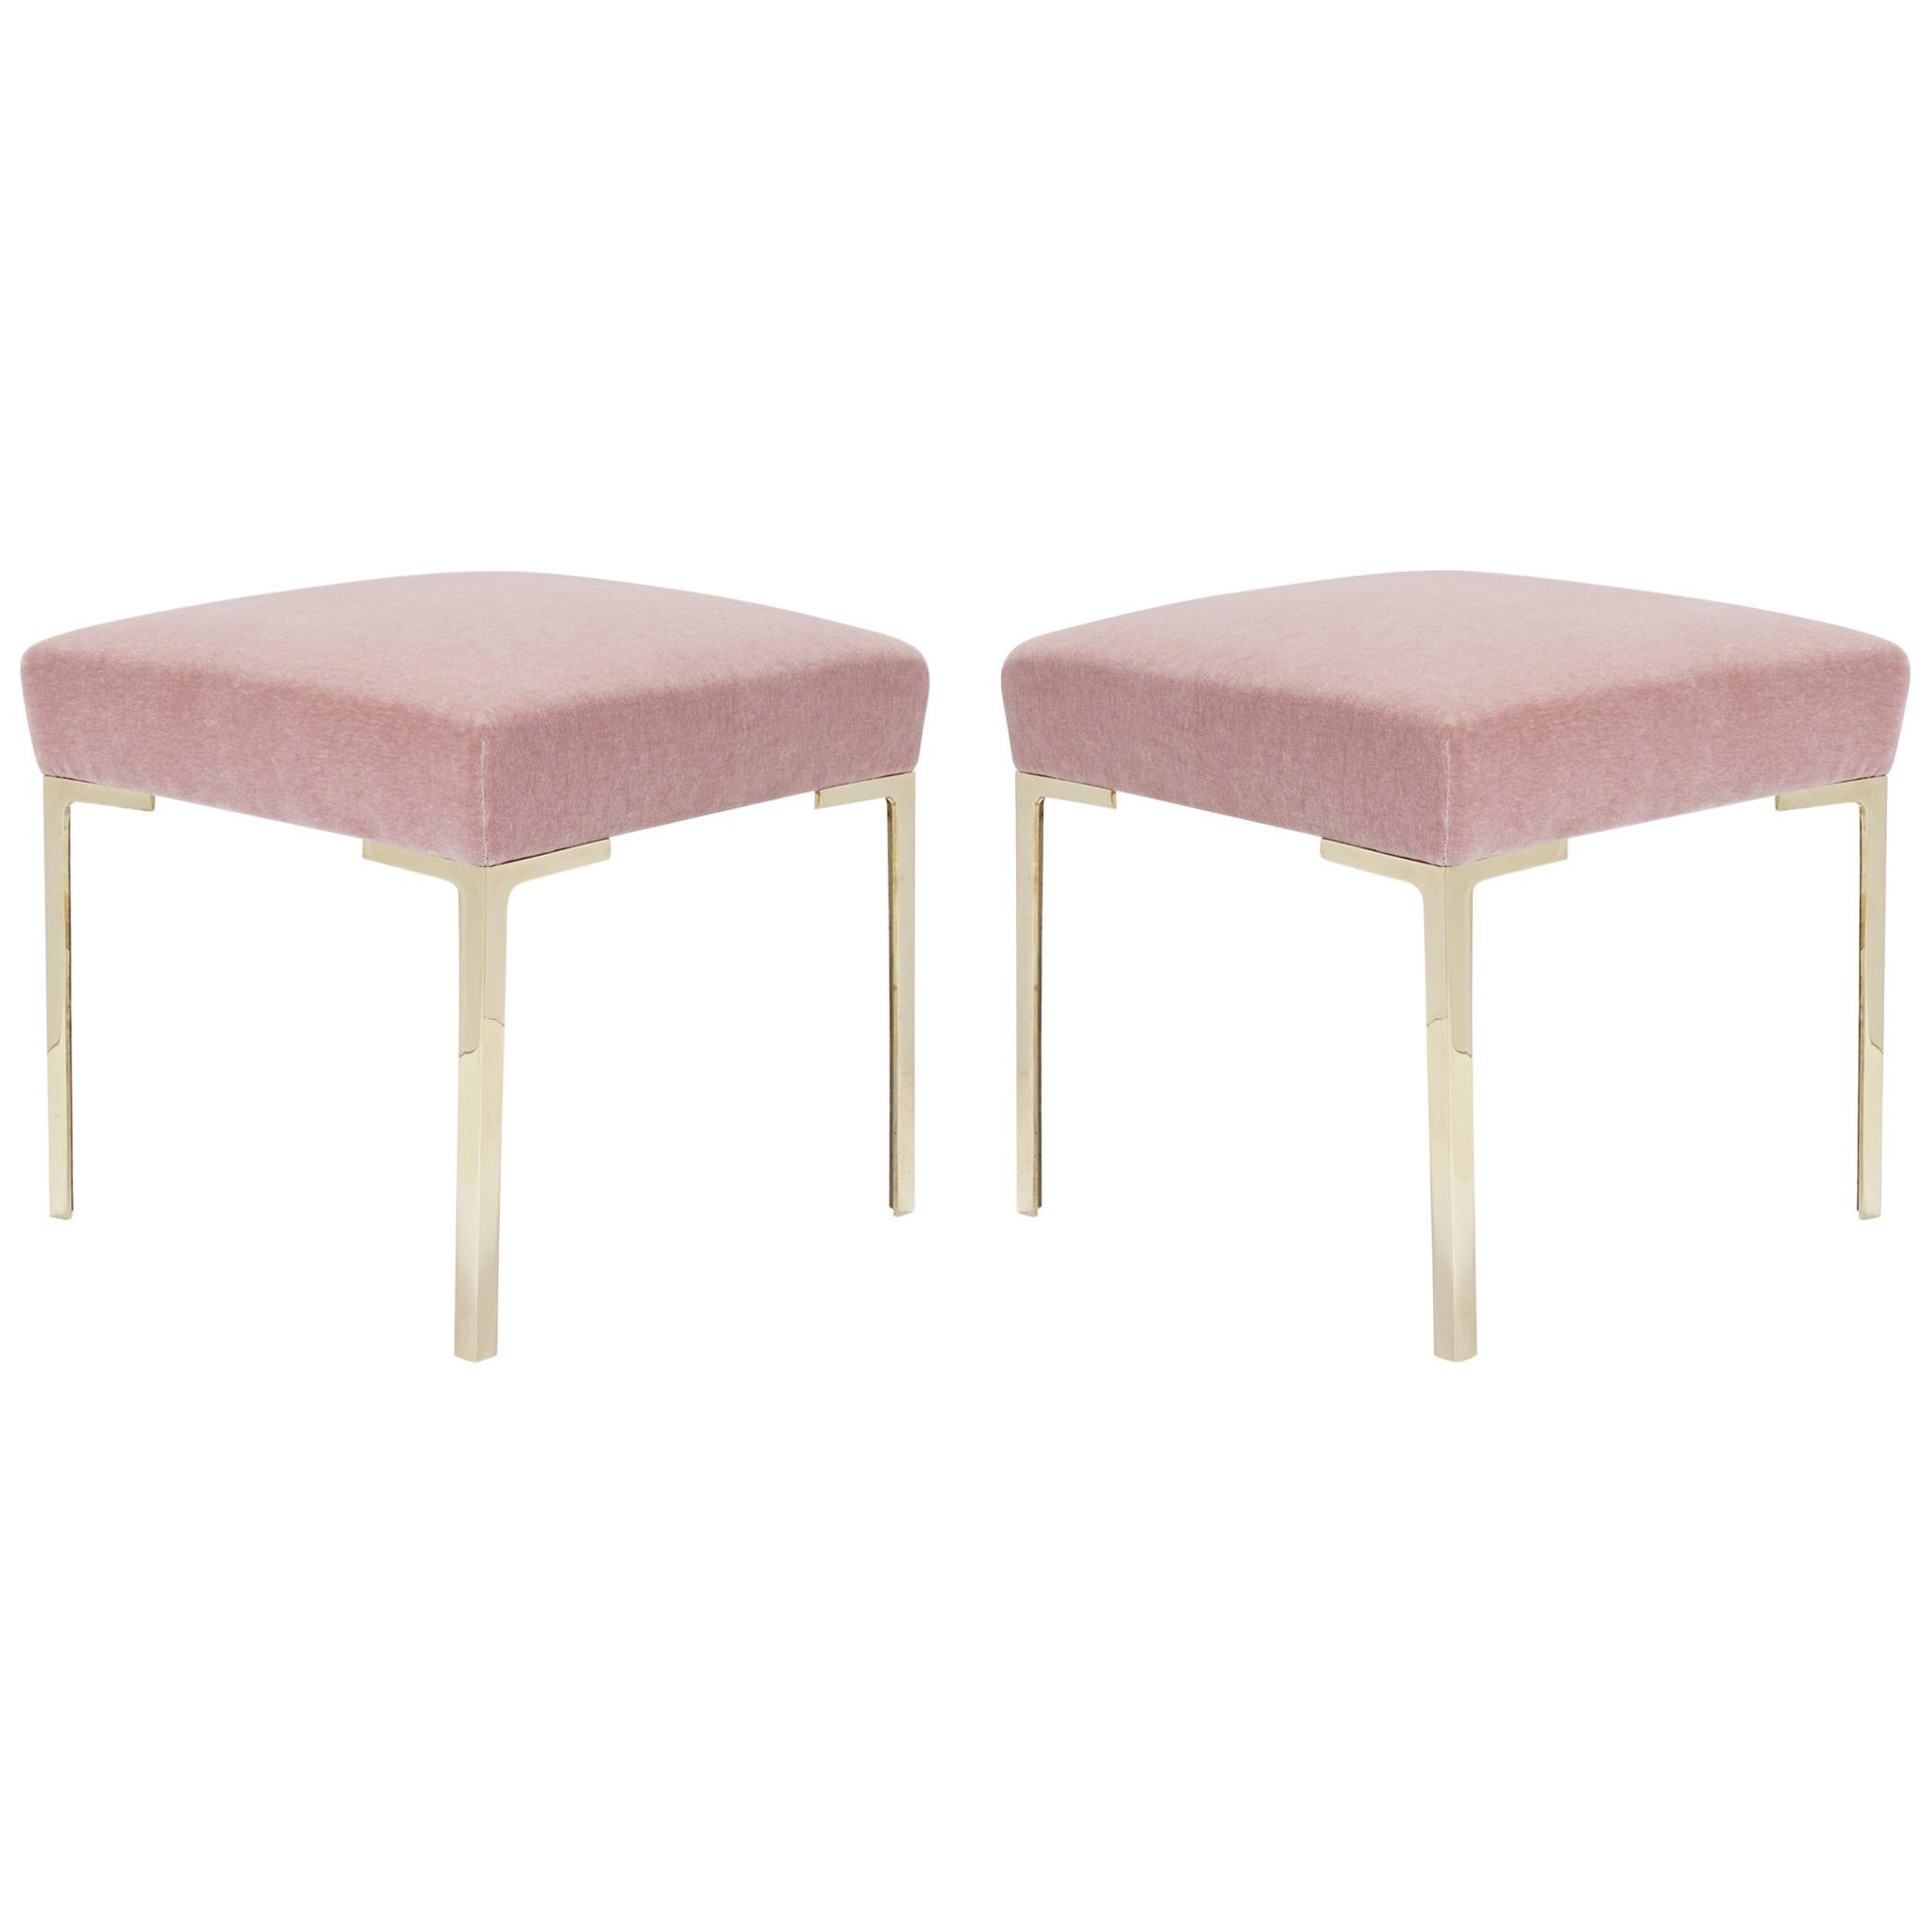 Astor Petite Brass Ottomans in Blush Mohair by Montage, Pair For Sale